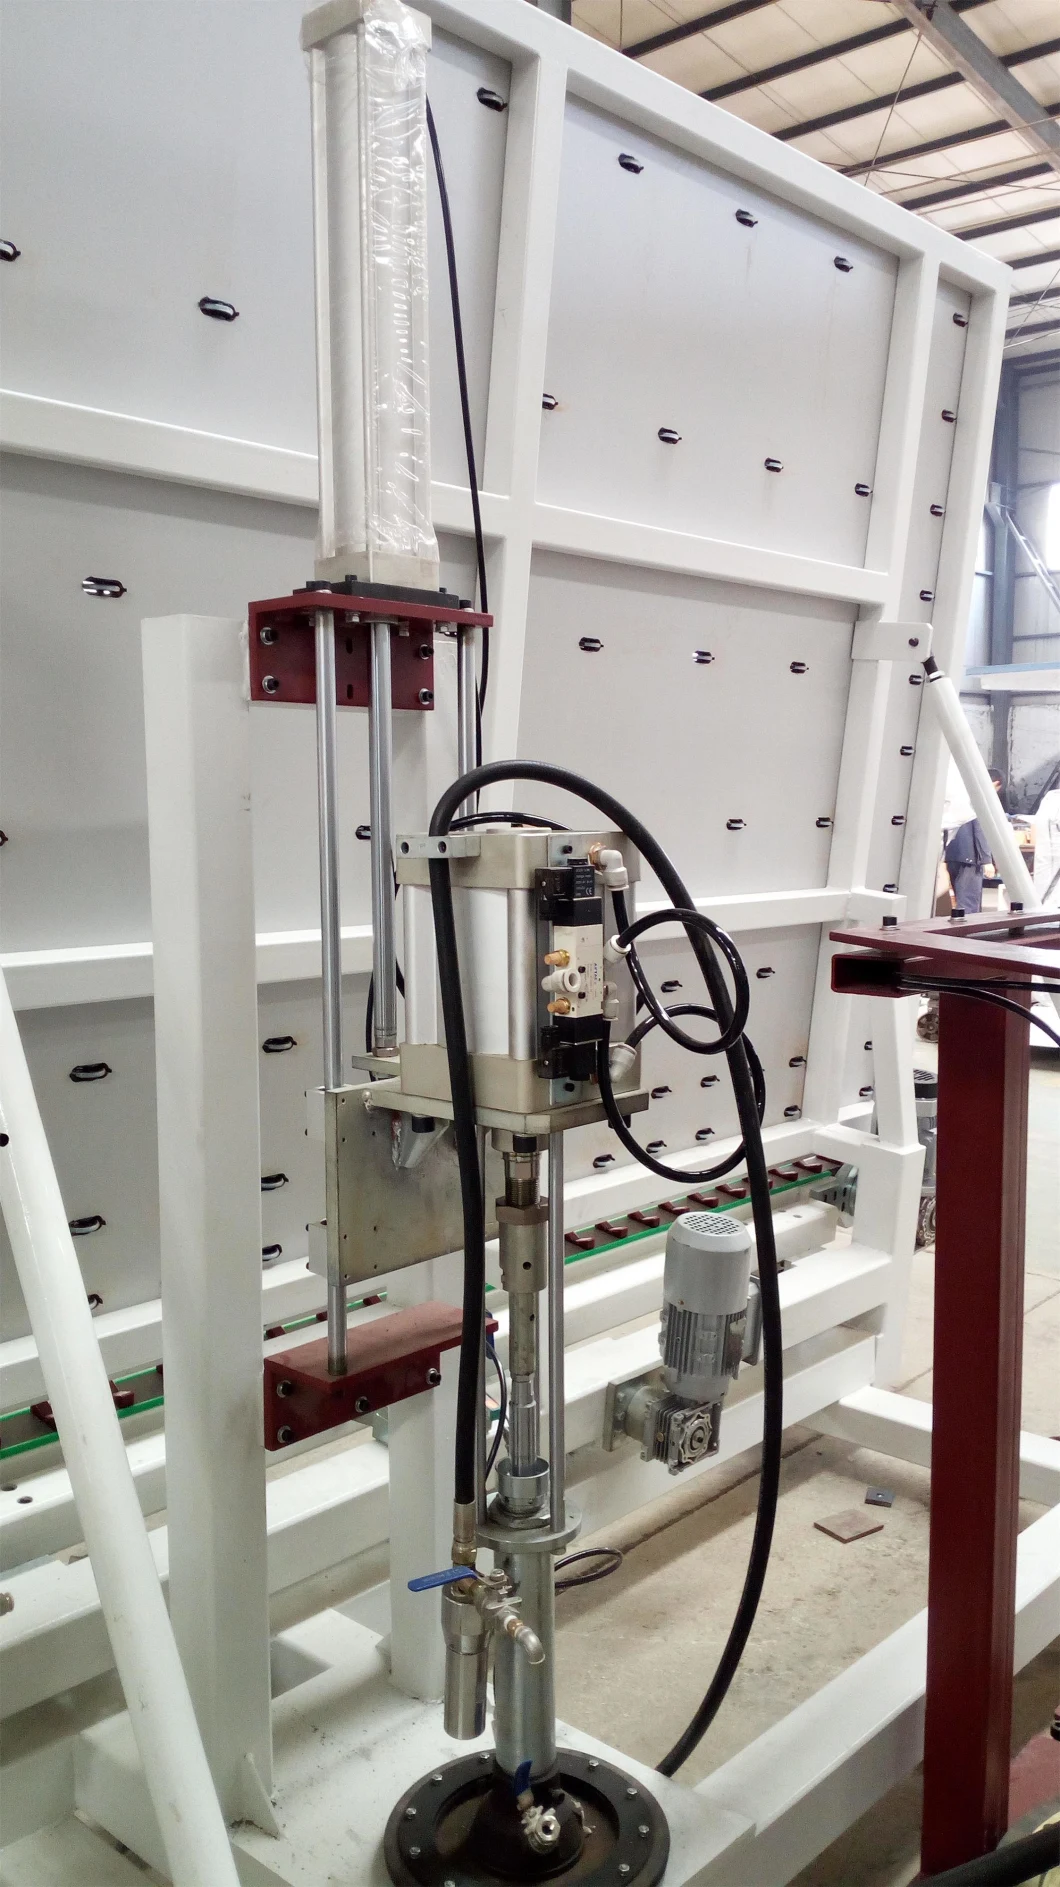 Insulating Glass Second Sealing Robot Machine for Double Glass